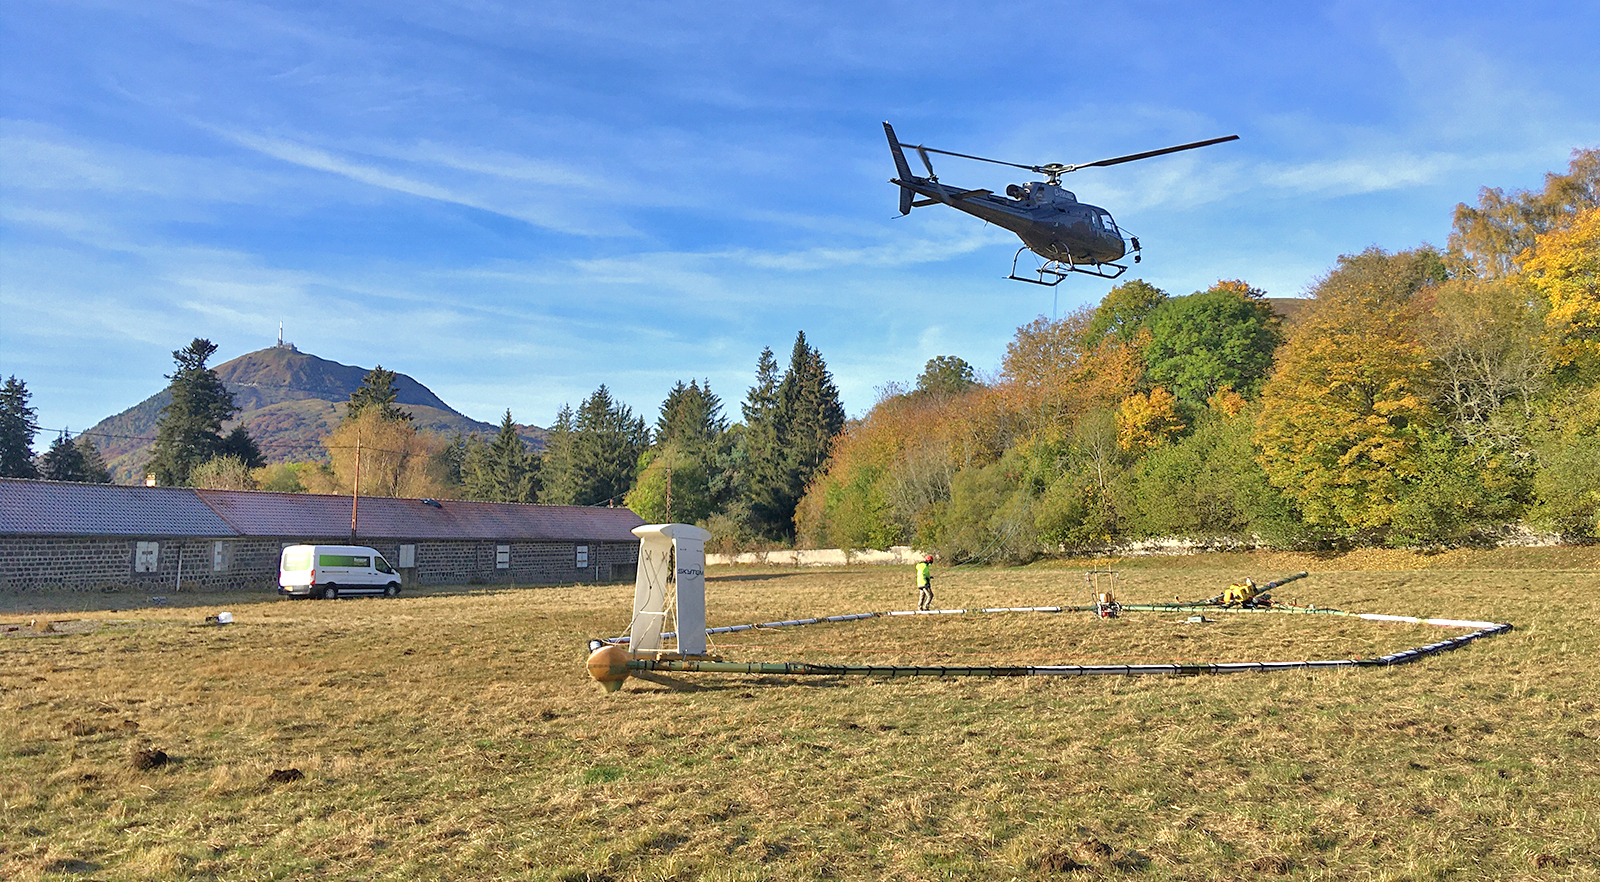 Aérovergne helicopter-borne geophysics campaign in Auvergne. This project involves a survey drawing upon three geophysical methods to try to unravel the mysteries of the subsurface of this region. © BRGM - A. Raingeard